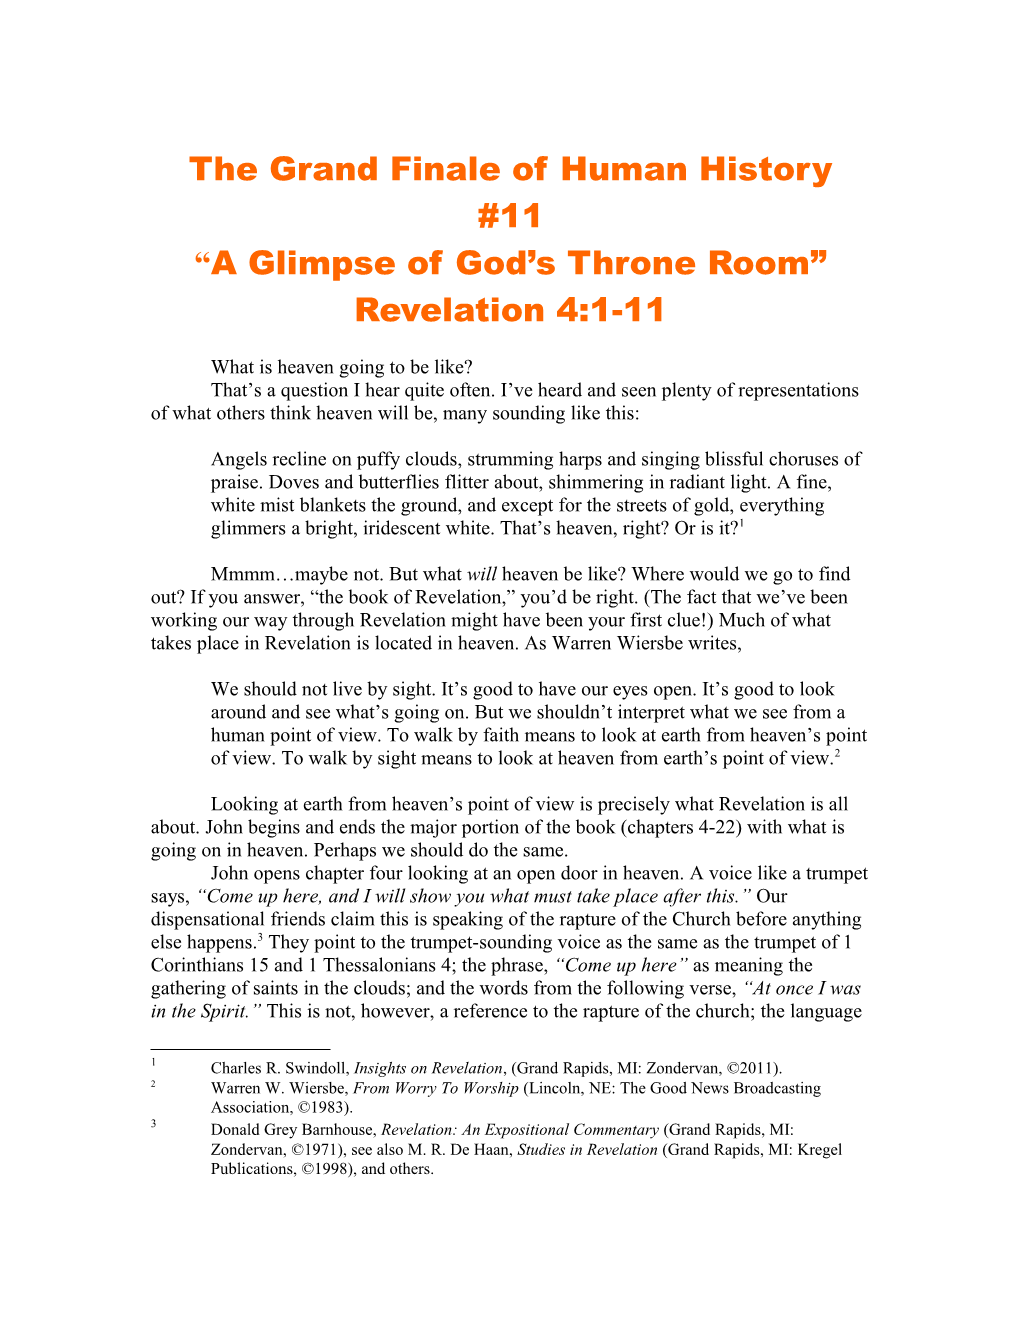 The Grand Finale of Human History #11